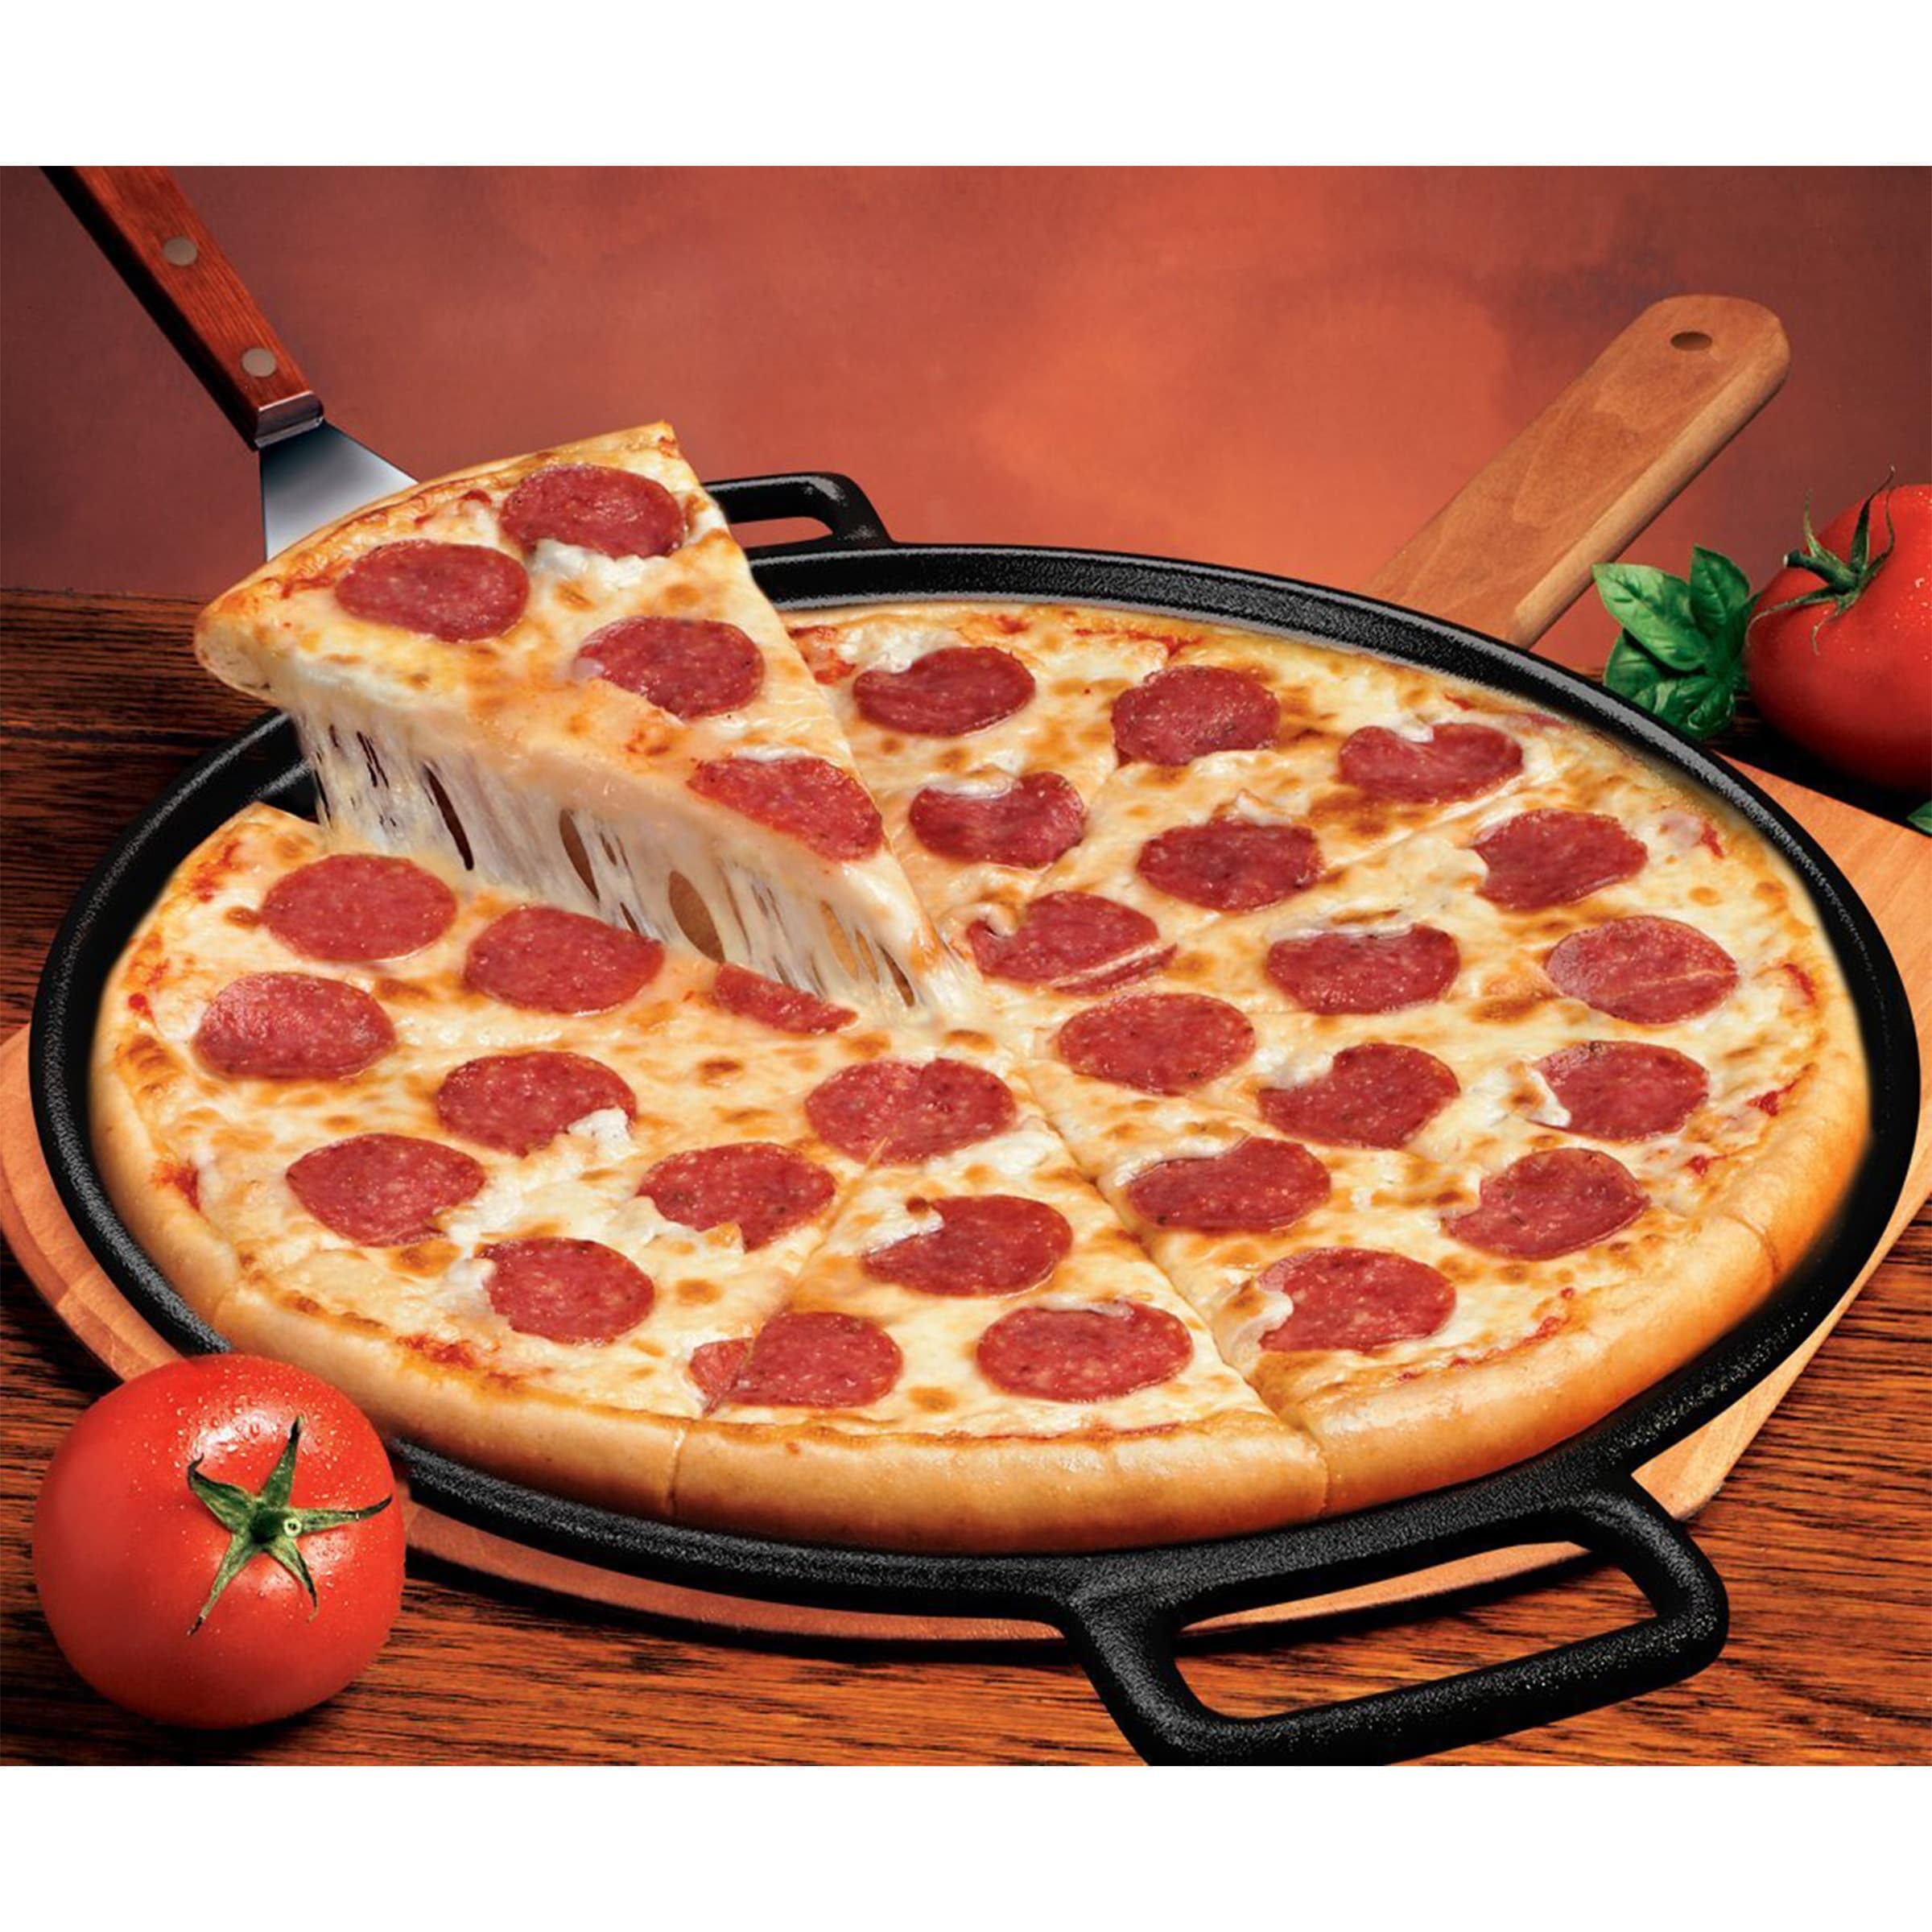 https://ak1.ostkcdn.com/images/products/is/images/direct/8fd1ea538b1902a7fcbca8dfdb789ac4b1b67aea/Cast-Iron-Pizza-Pan-14%E2%80%9D-Skillet-for-Cooking%2C-Baking%2C-Grilling-Durable-Home-Complete.jpg